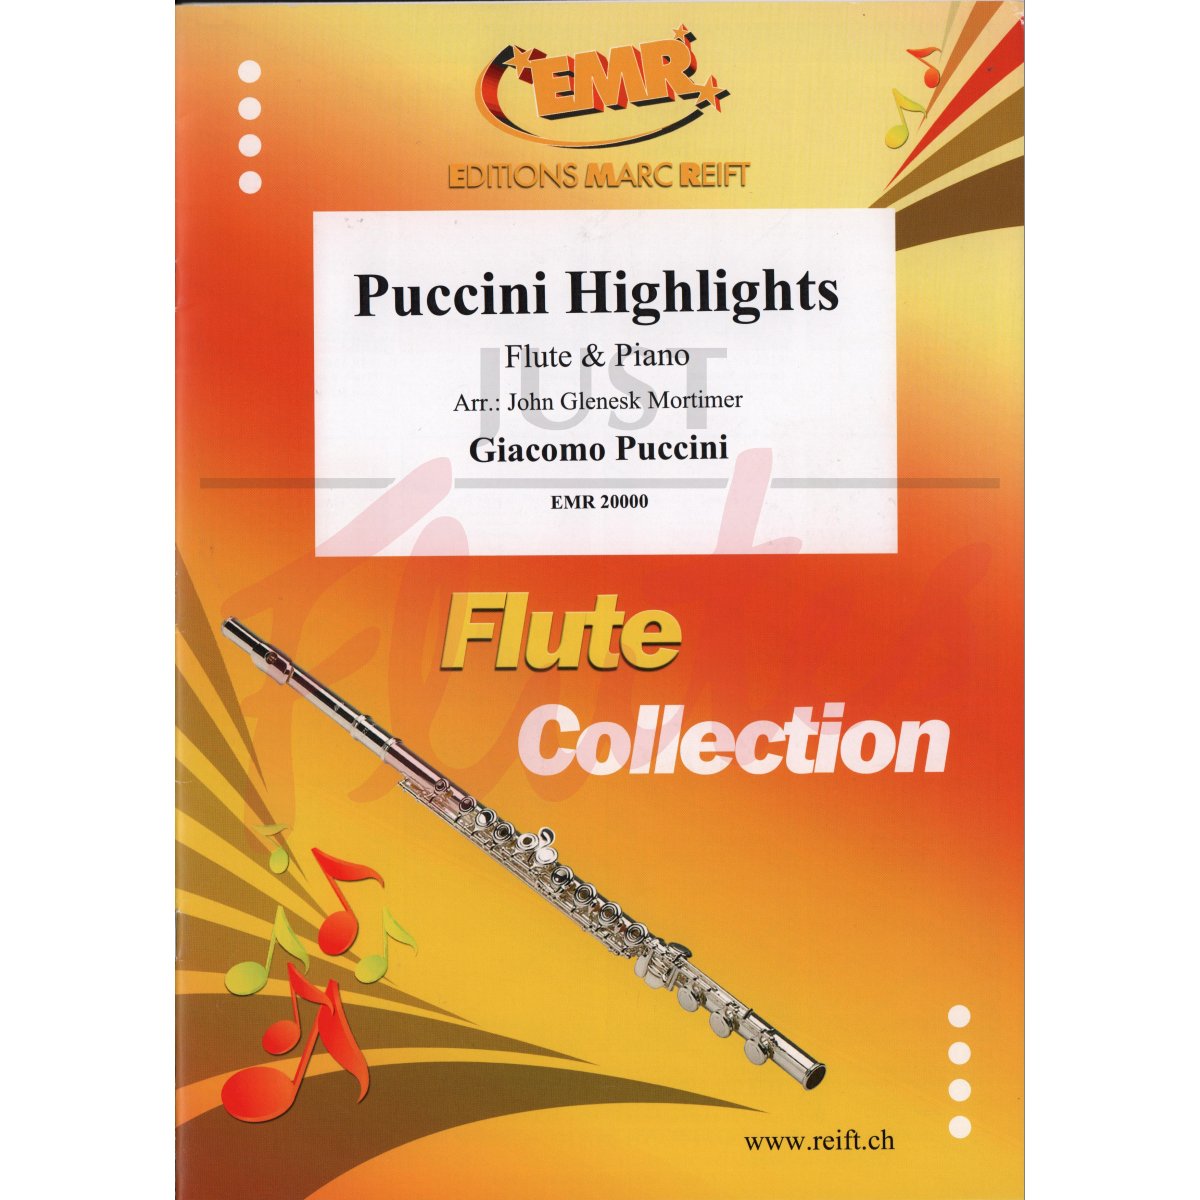 Puccini Highlights for Flute and Piano